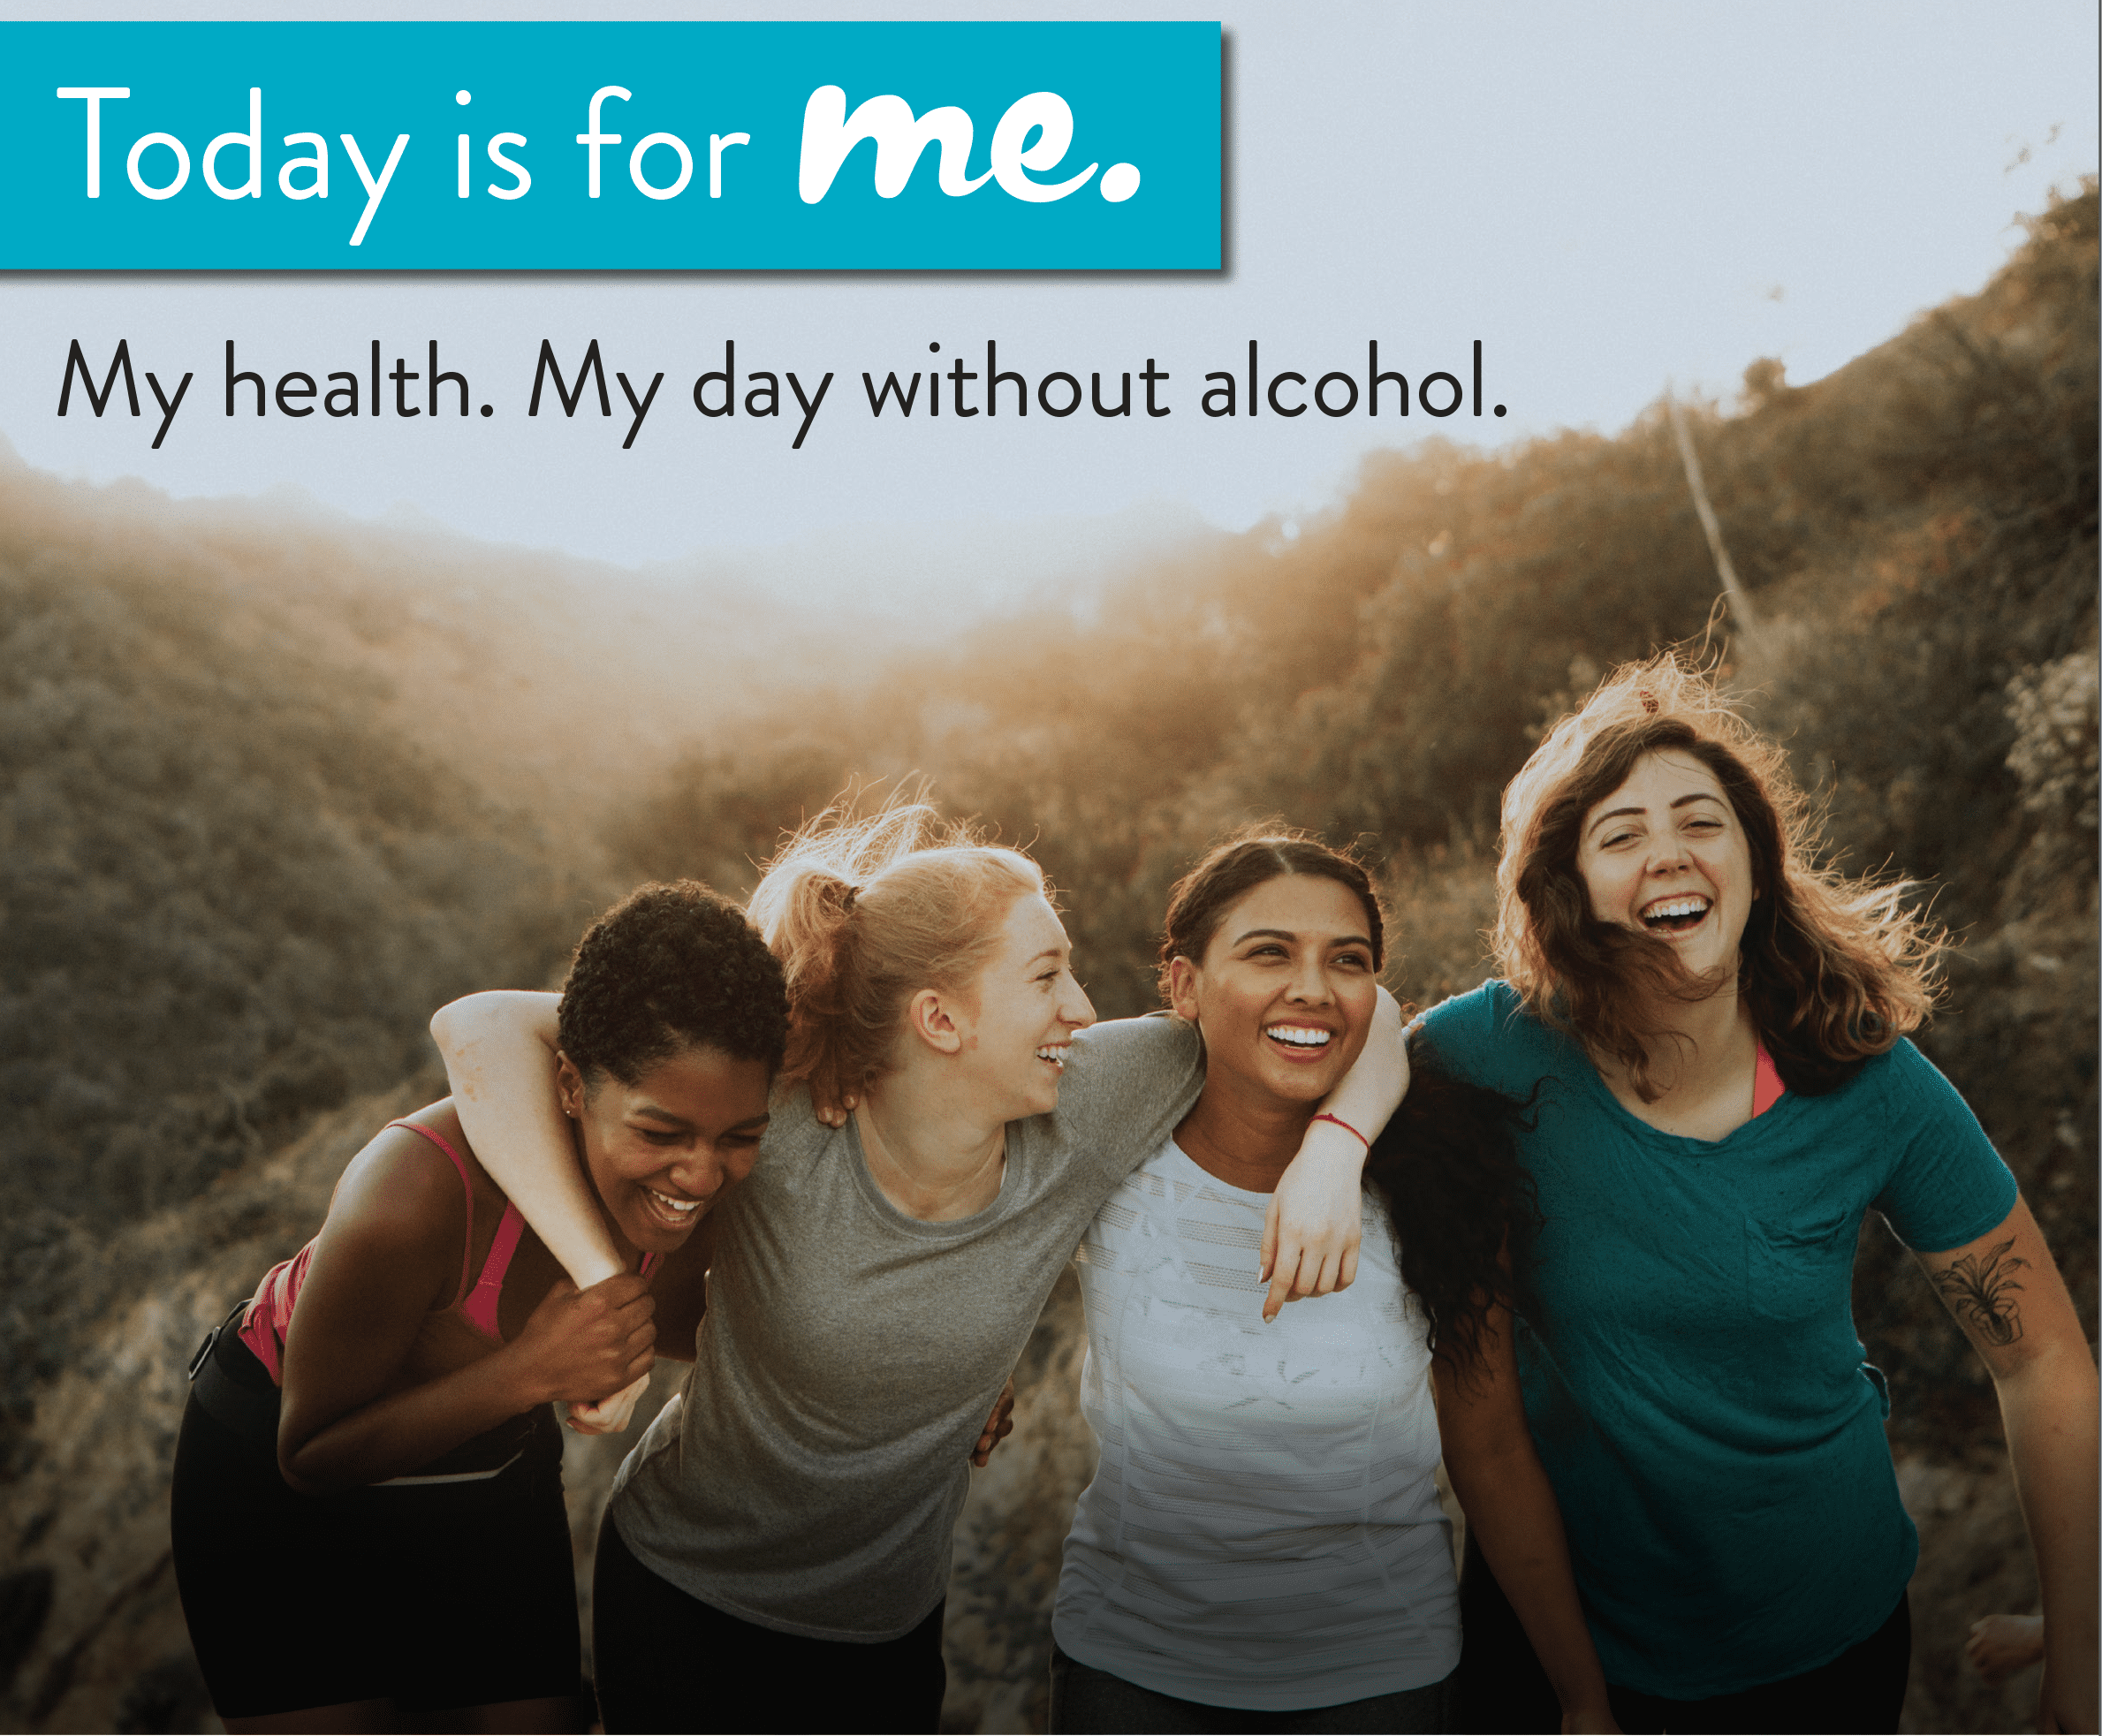 “Today is For Me.” – A lifestyle campaign educates women on the harms of alcohol and marijuana use during pregnancy and breastfeeding